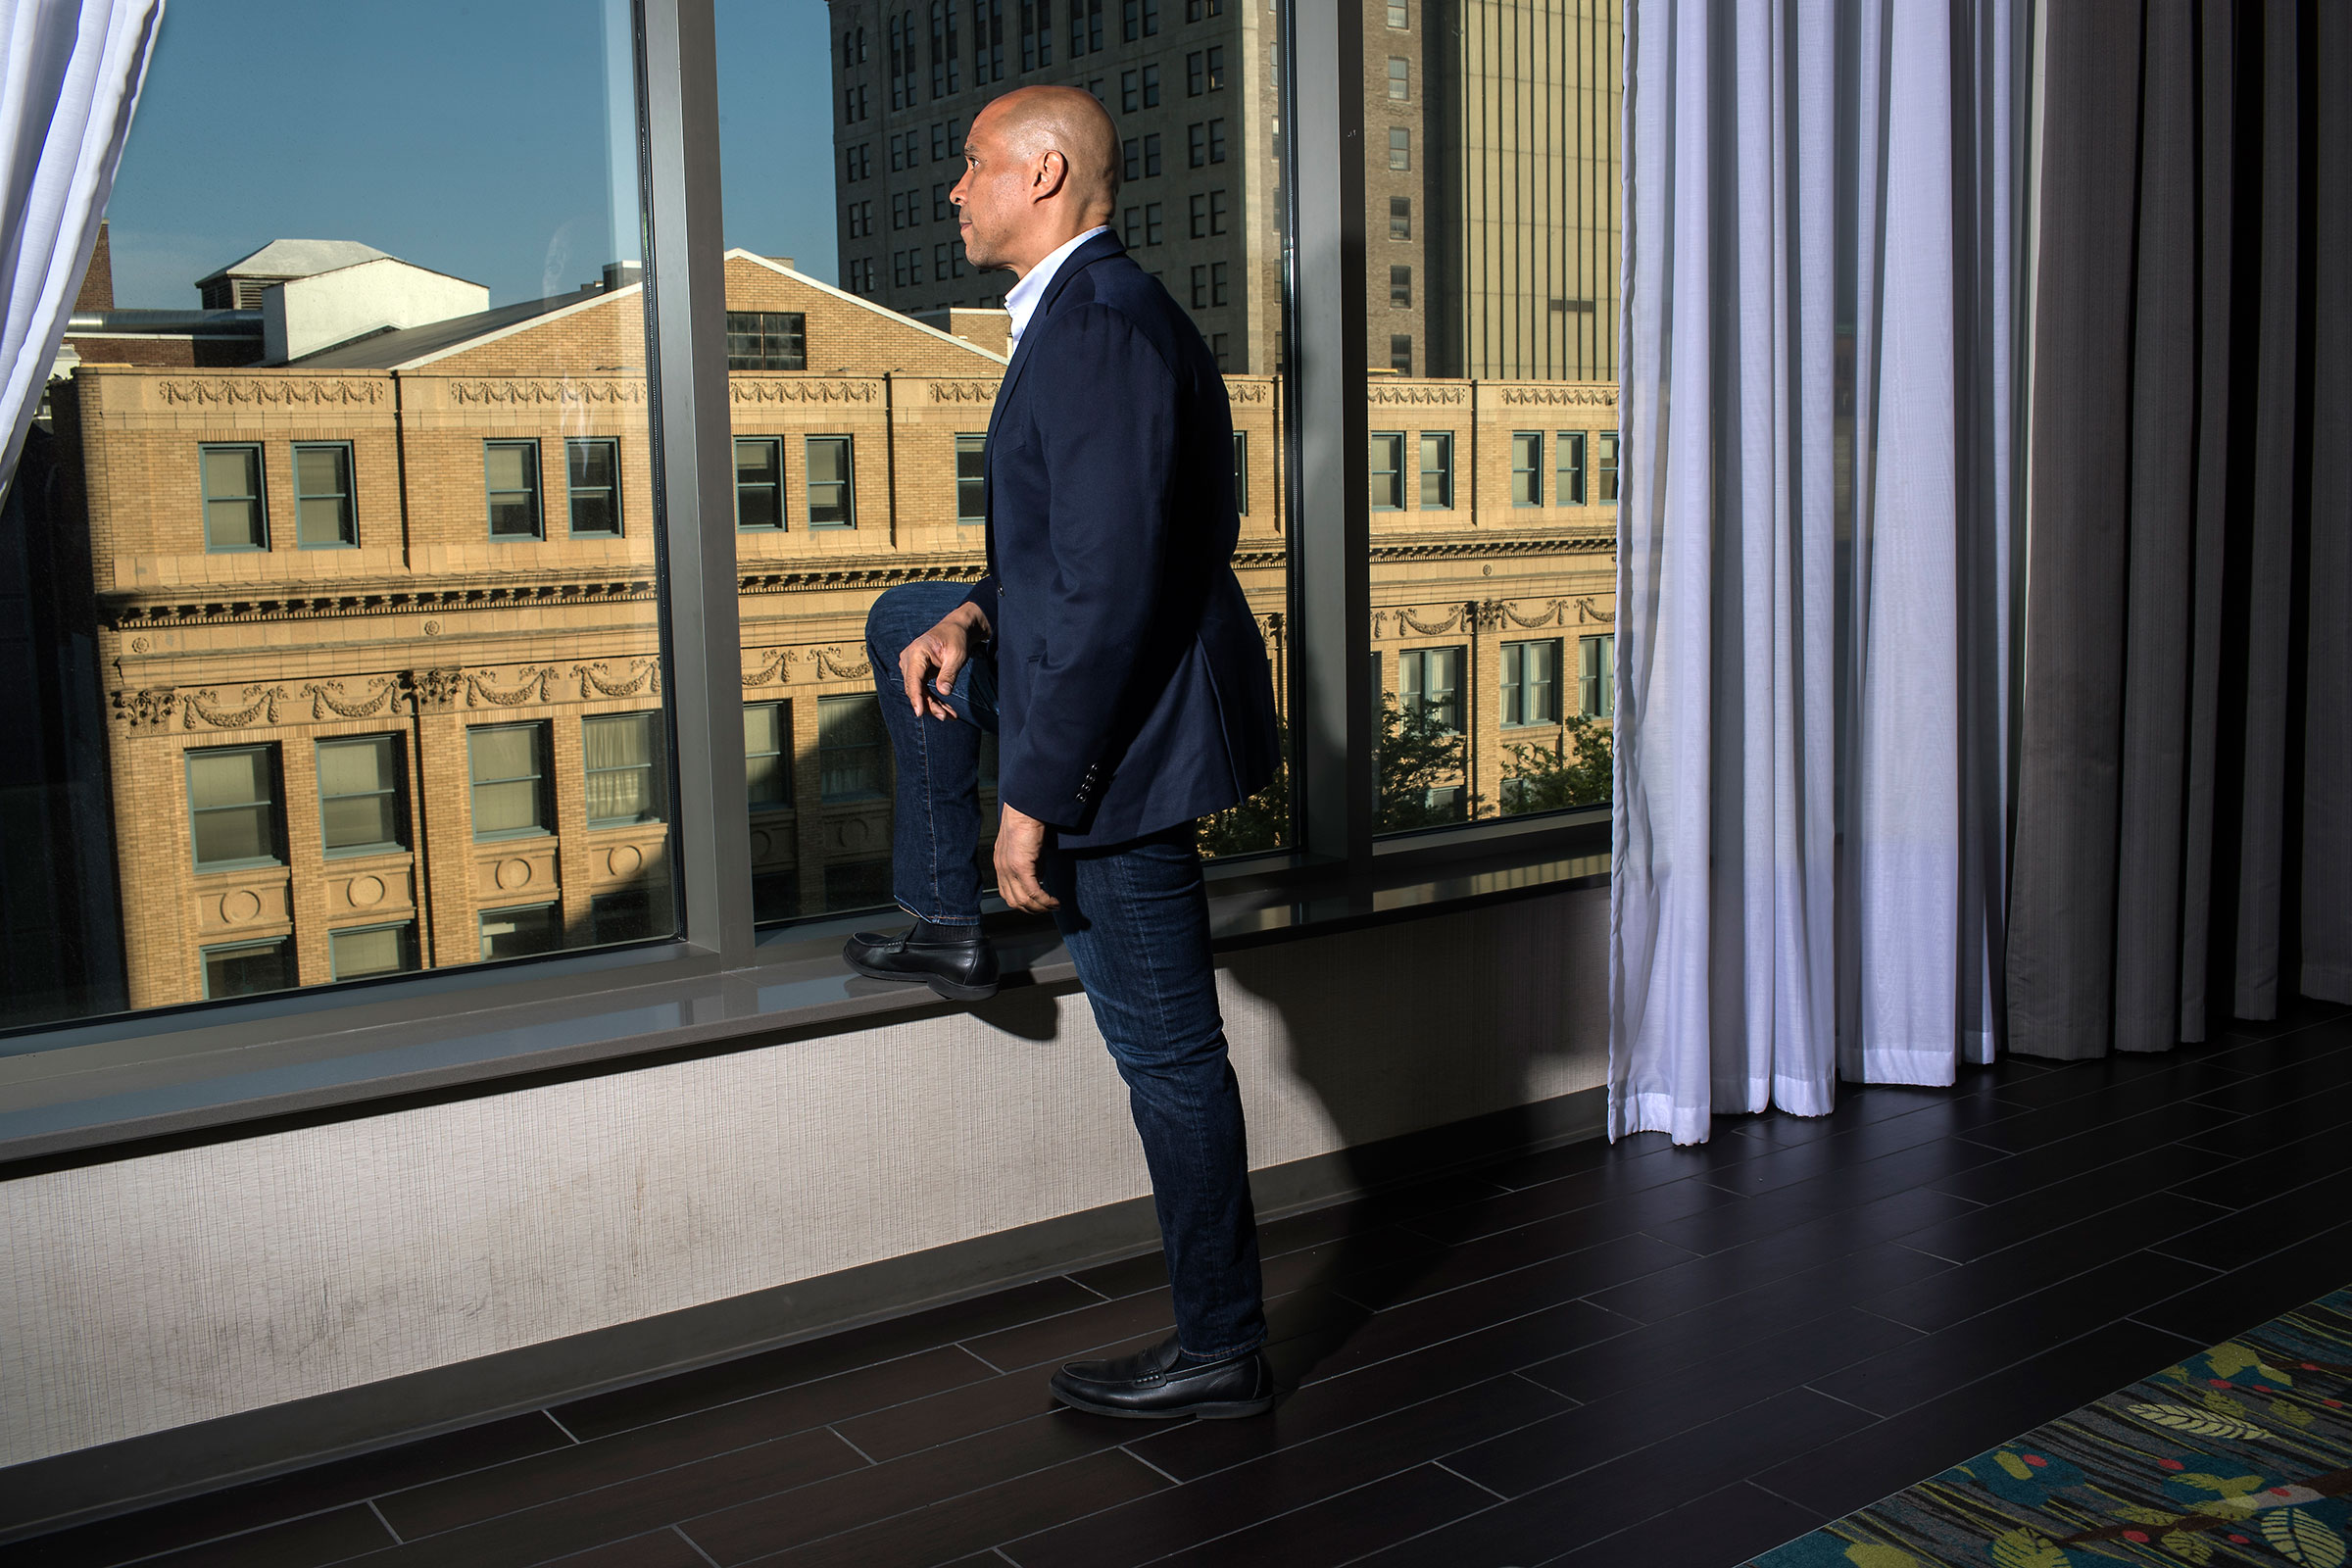 Booker stands for a portrait in downtown Cedar Rapids, Iowa on June 8. (Danny Wilcox Frazier—VII for TIME)